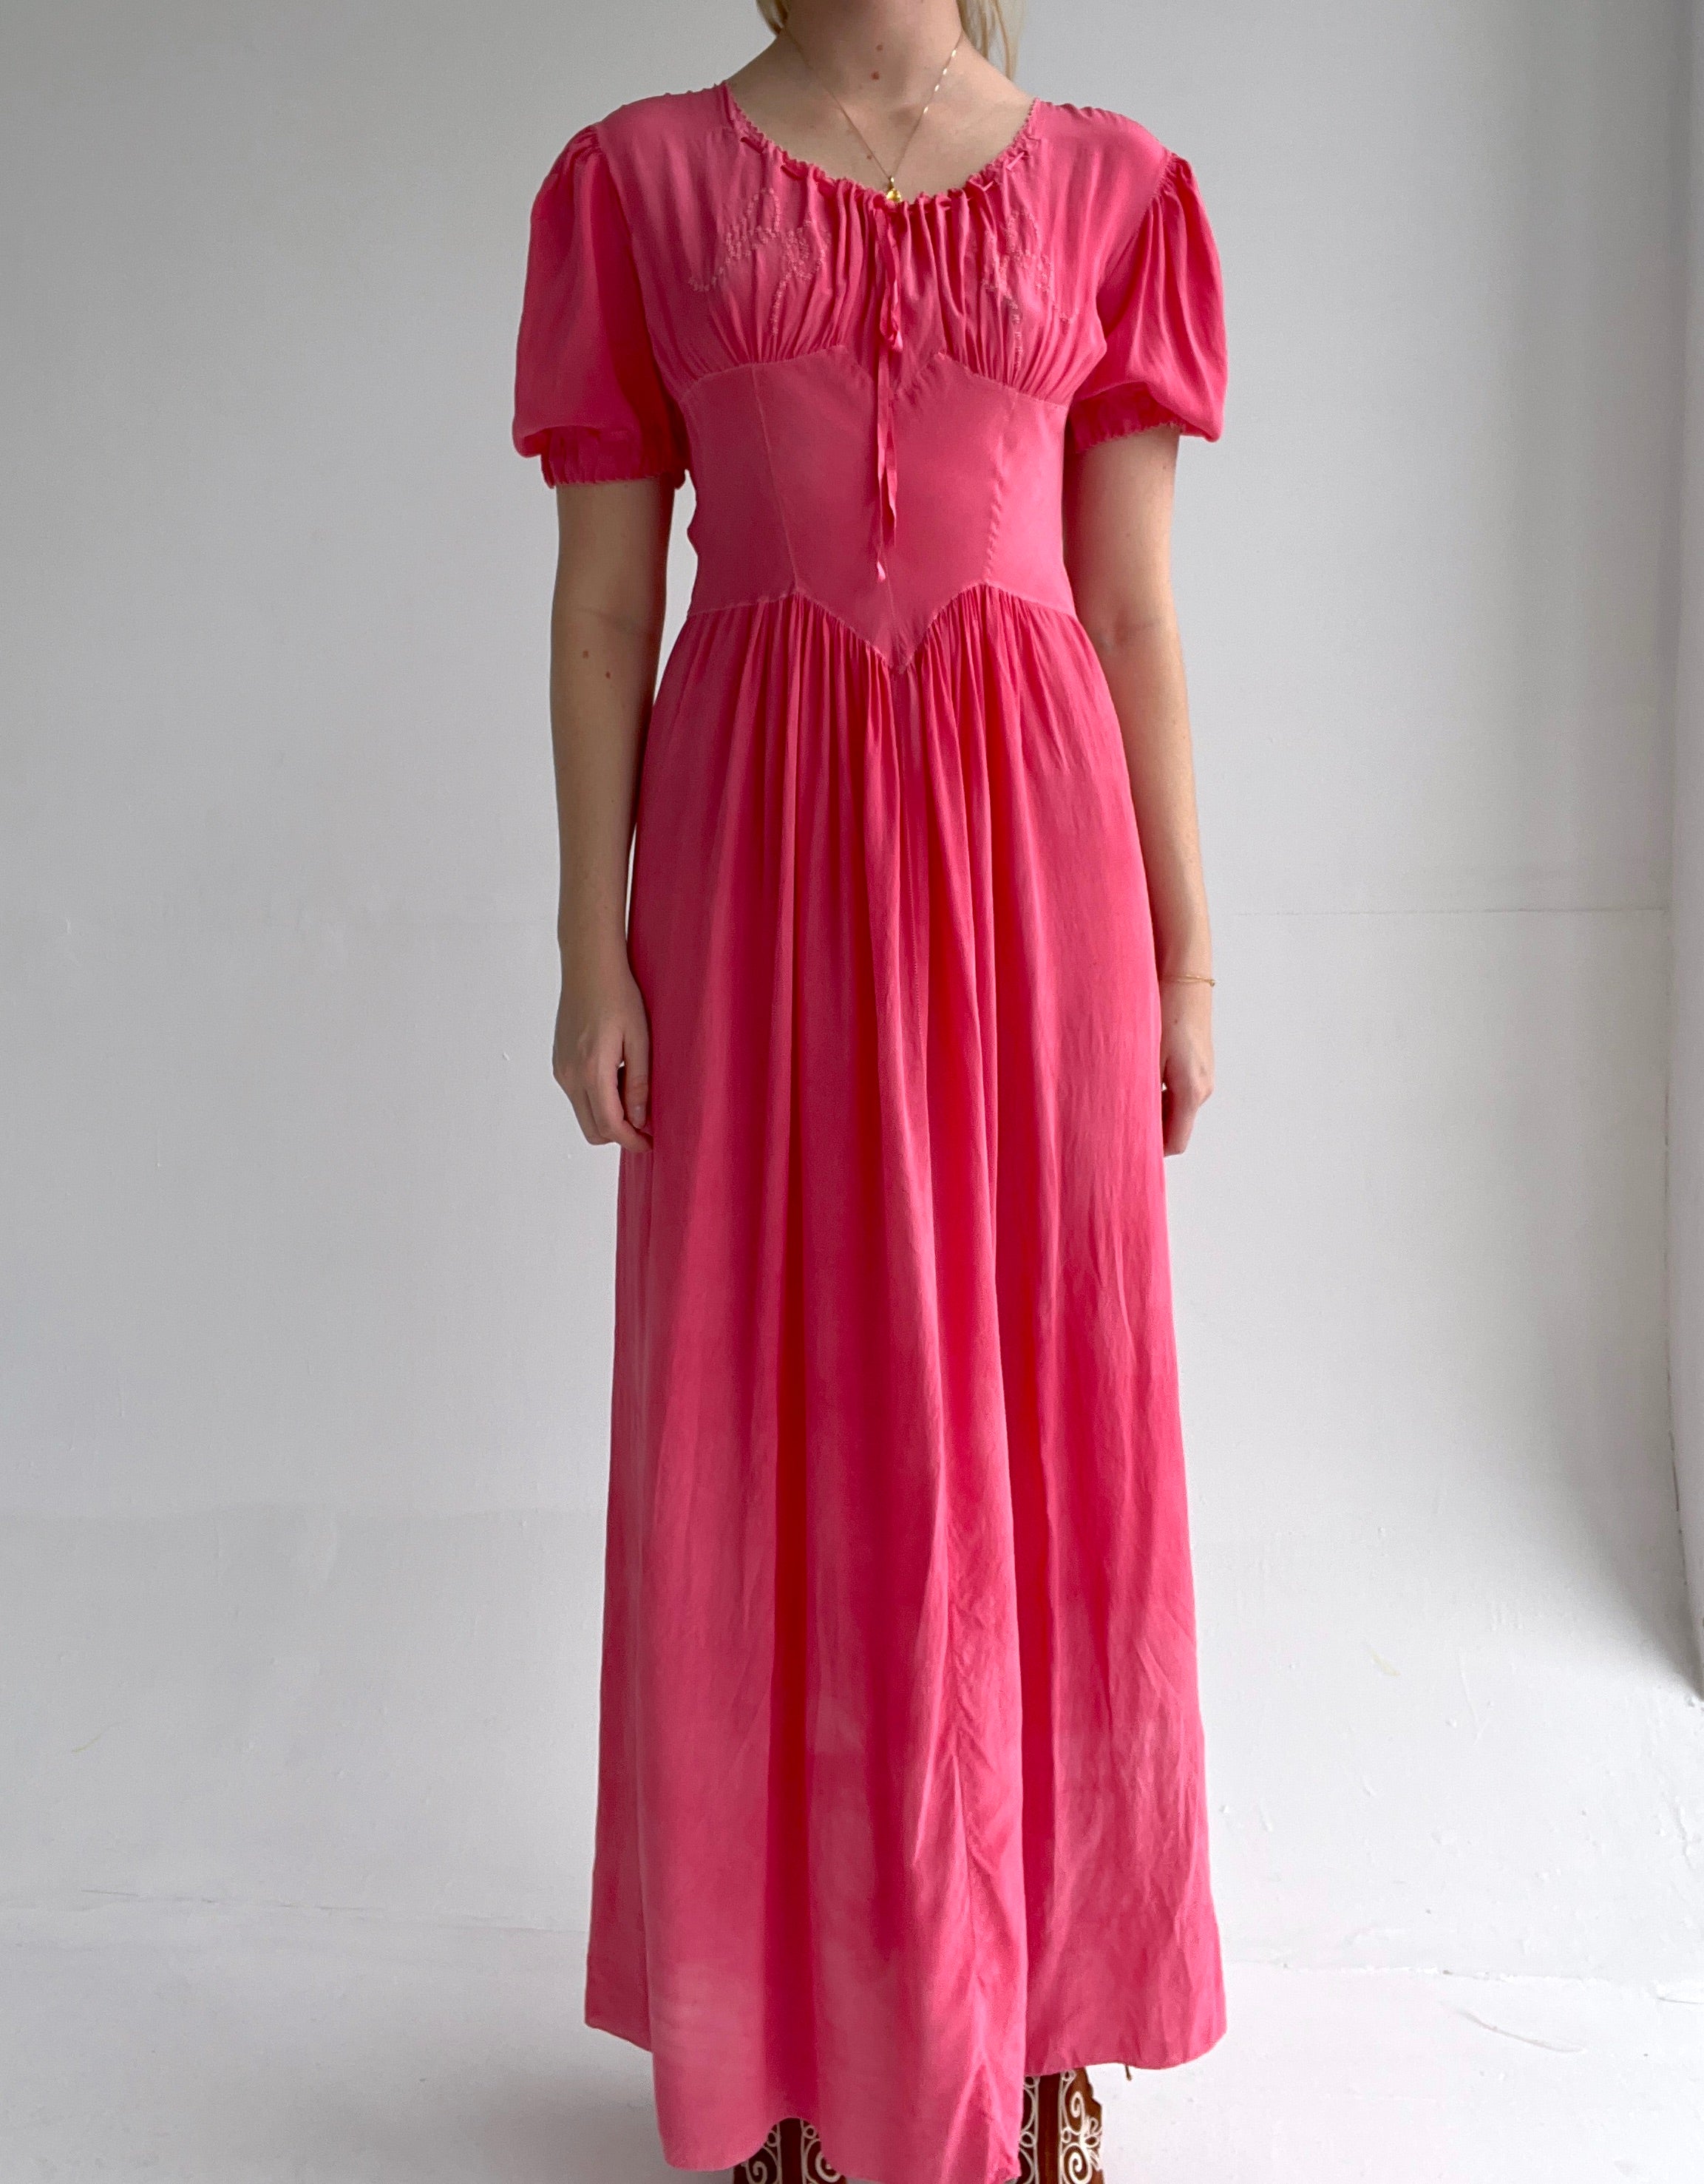 Hand Dyed Bougainvillea Bow Silk Dress